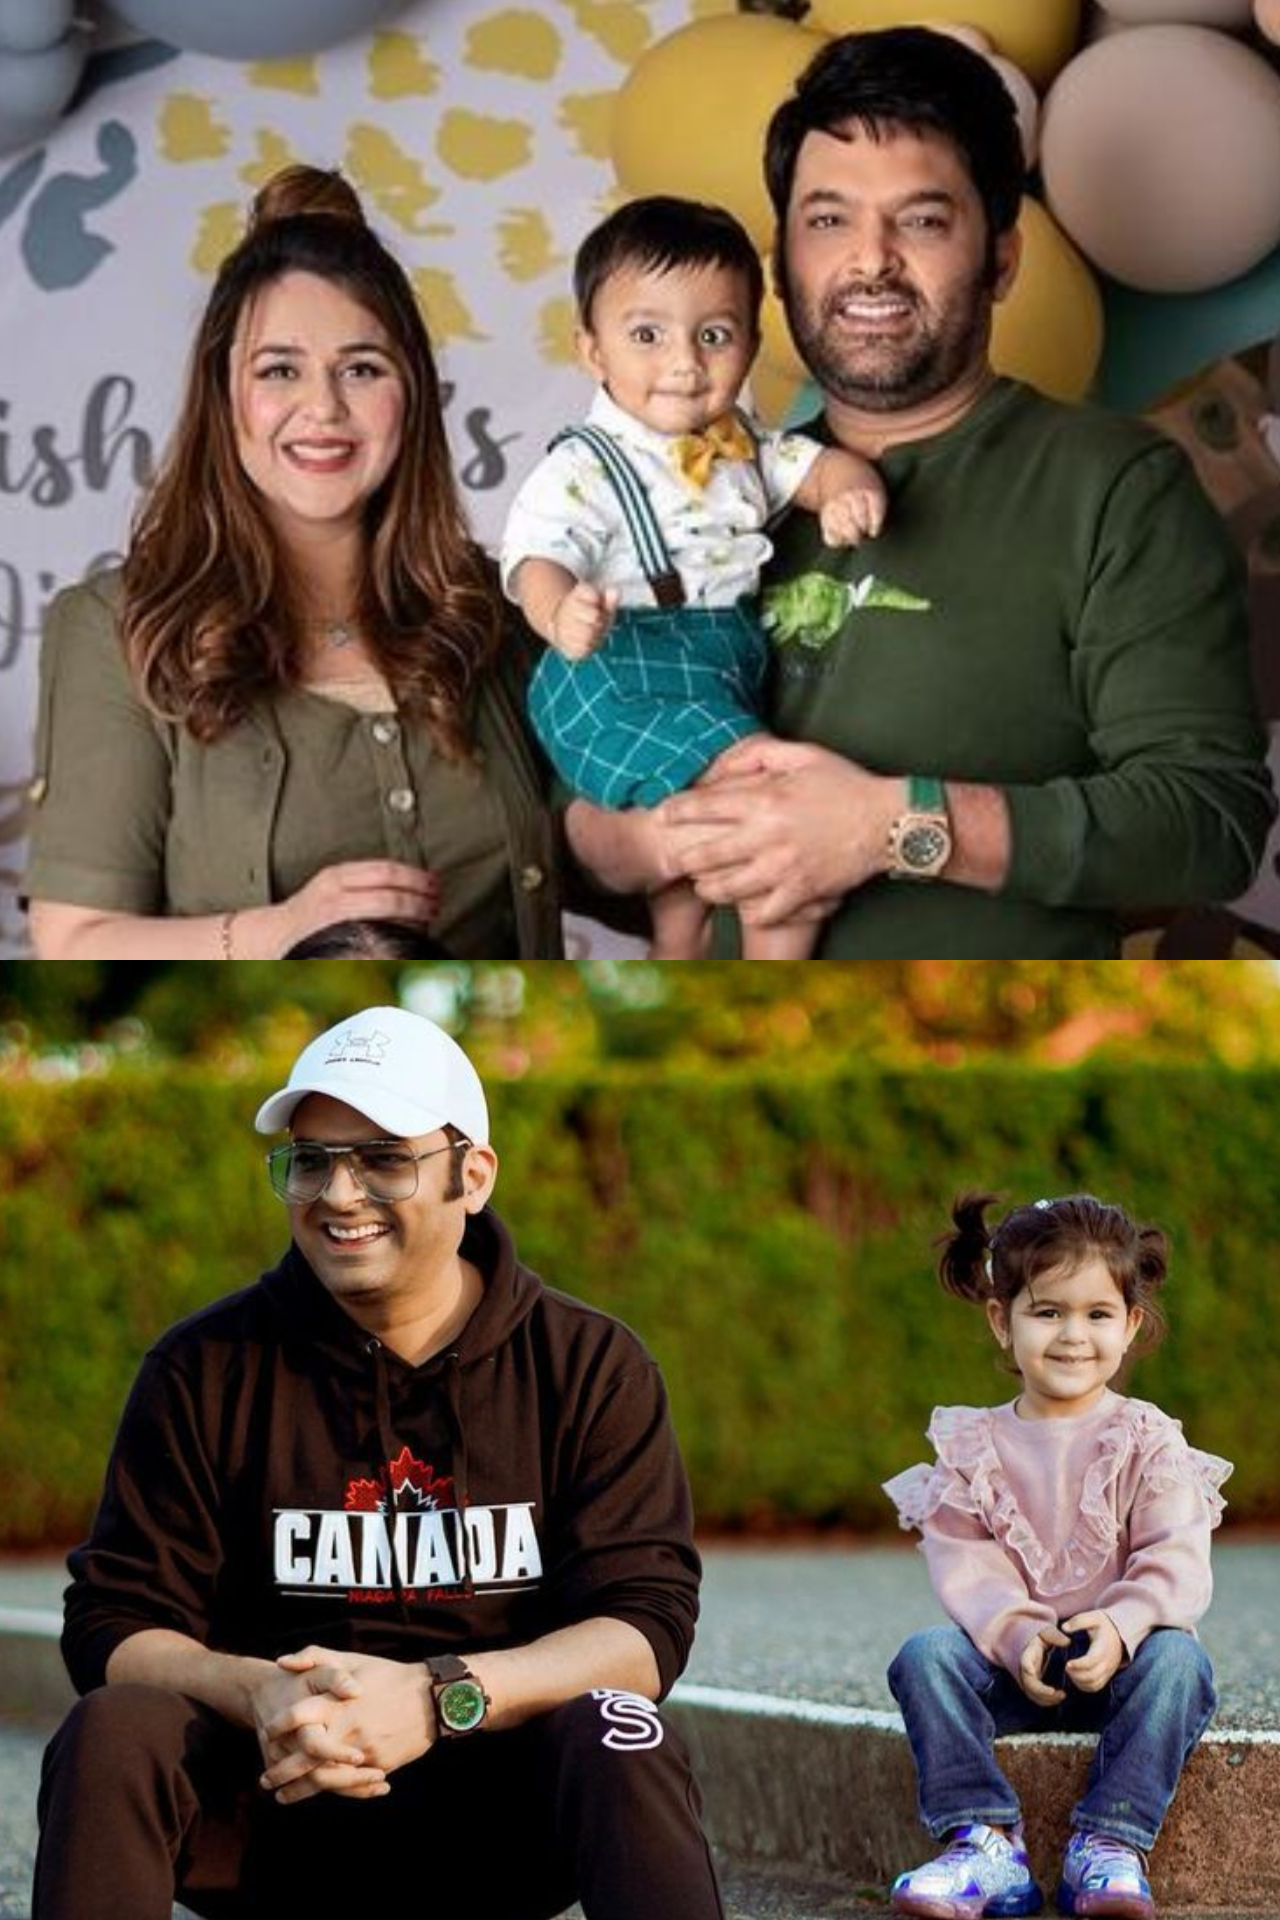 These family pictures of Kapil Sharma will surely make you smile